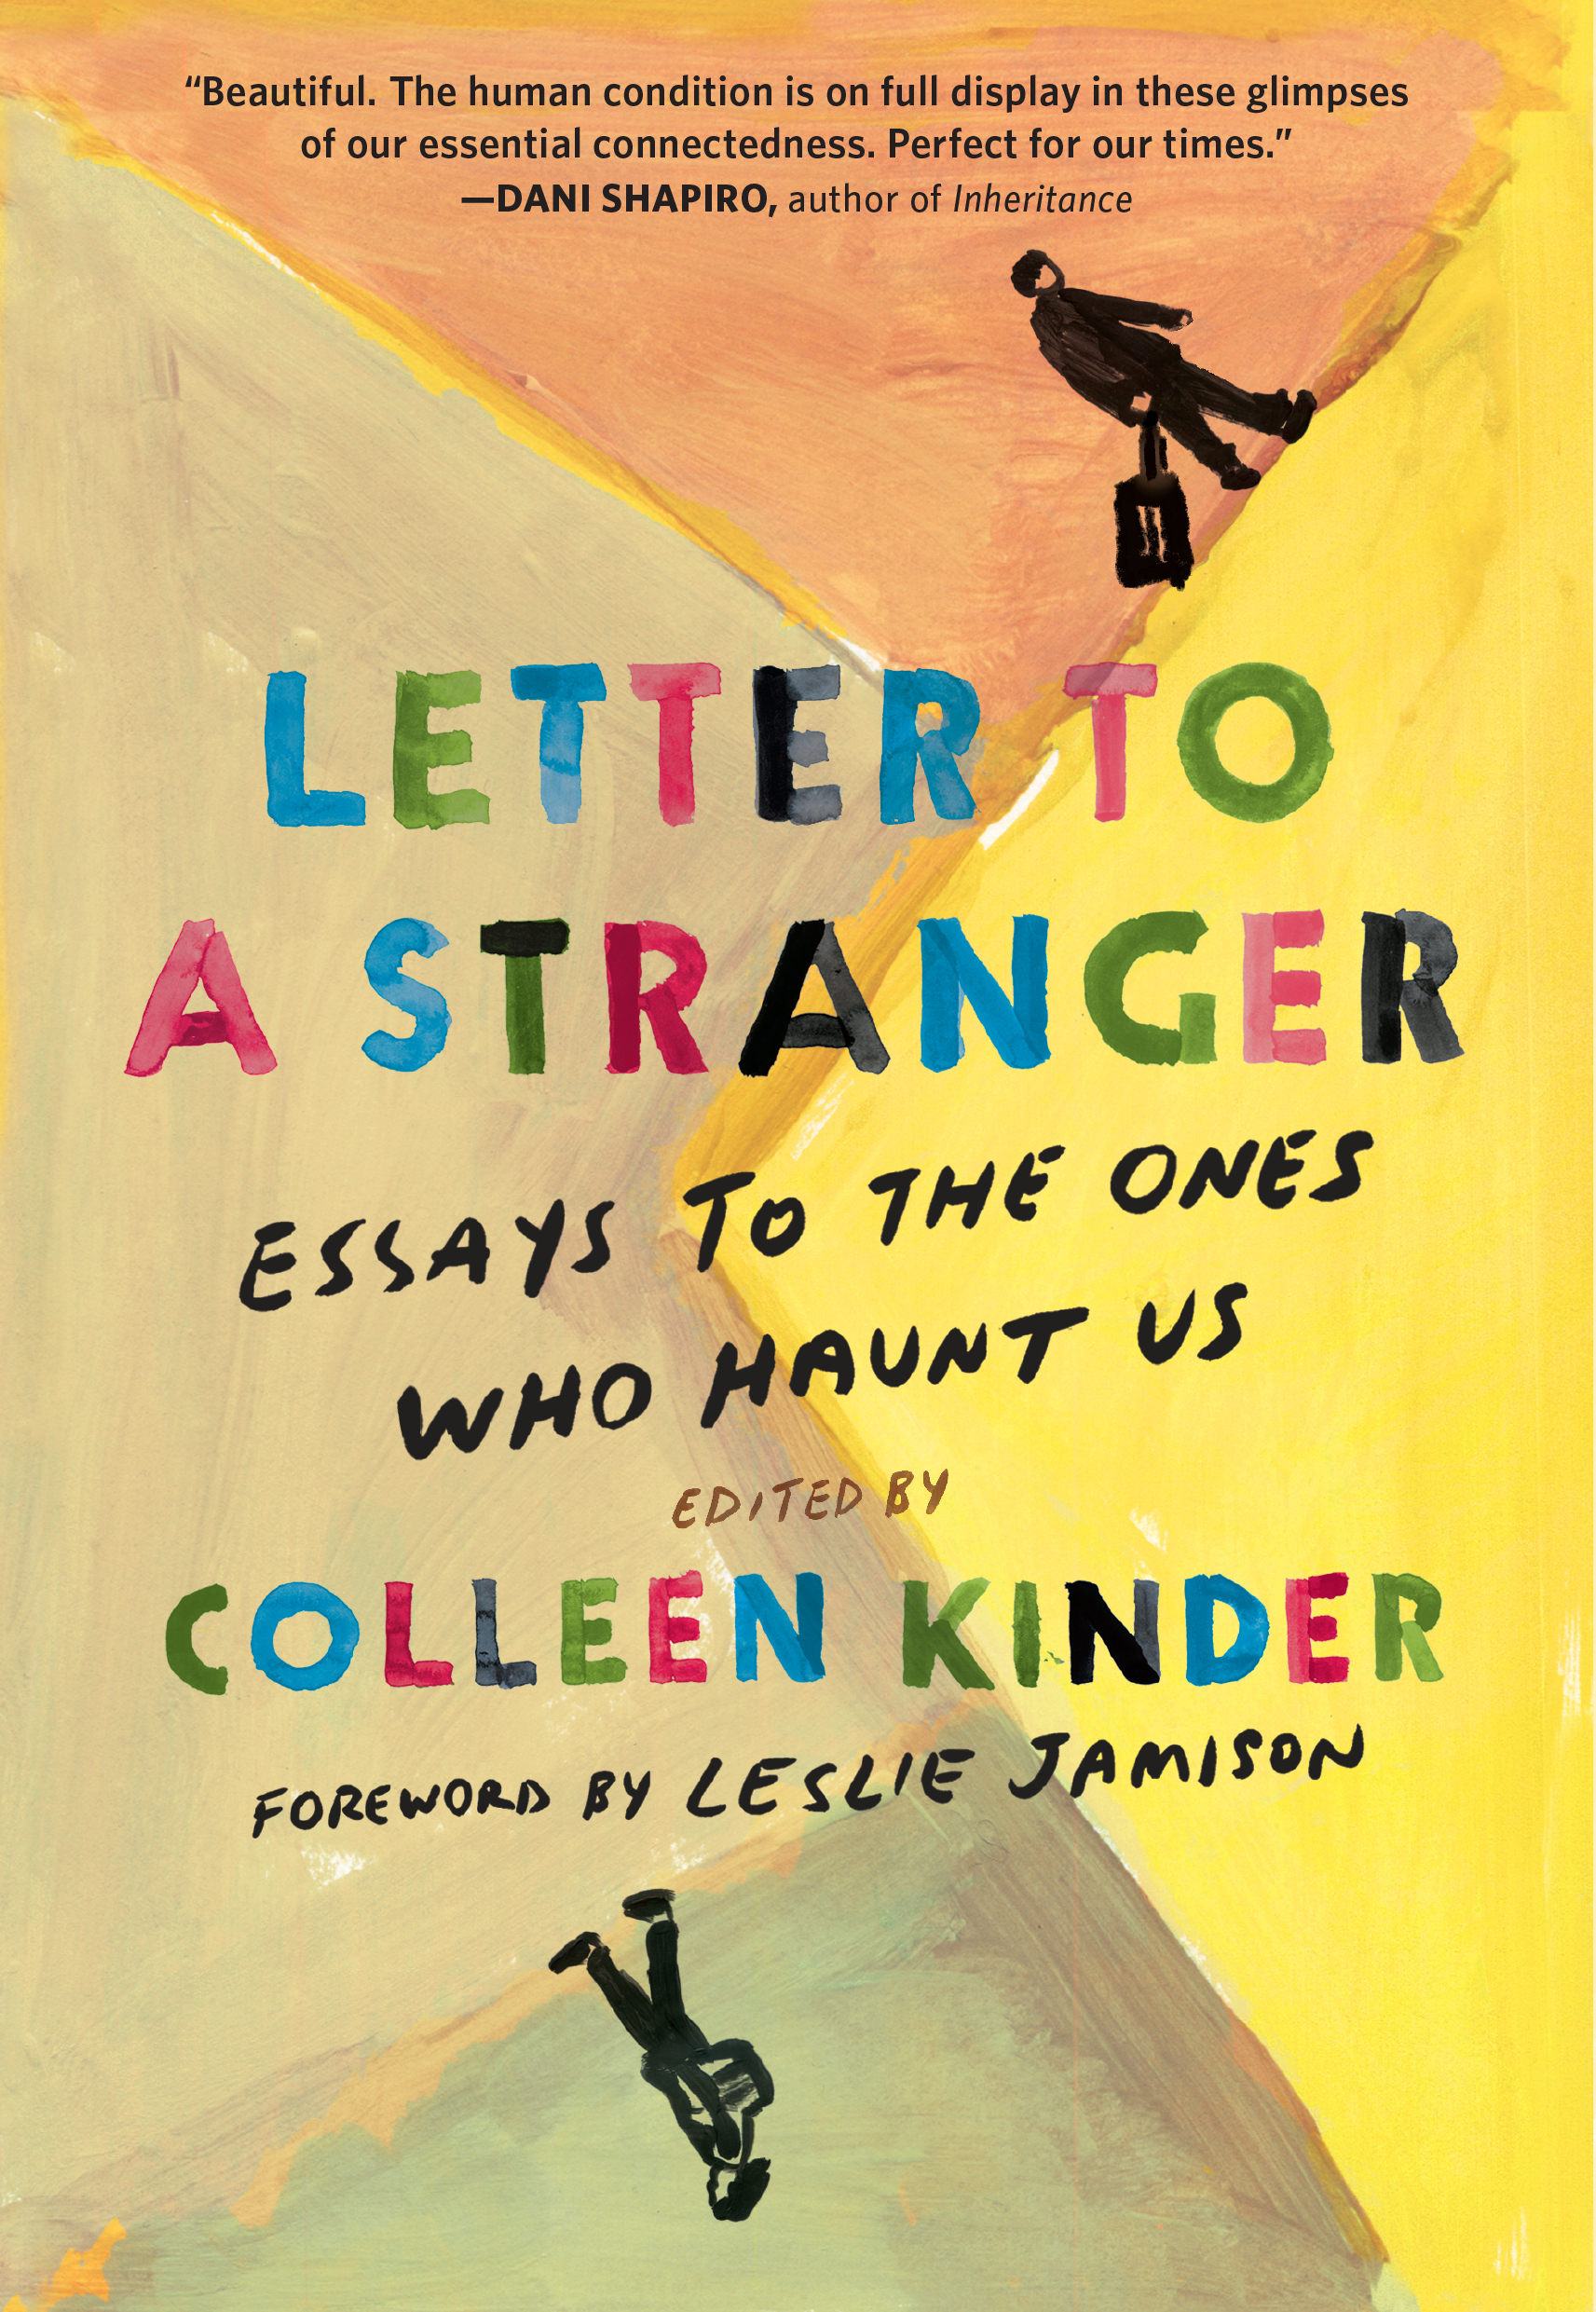 Letter to a Stranger by Colleen Kinder Hachette Book Group pic